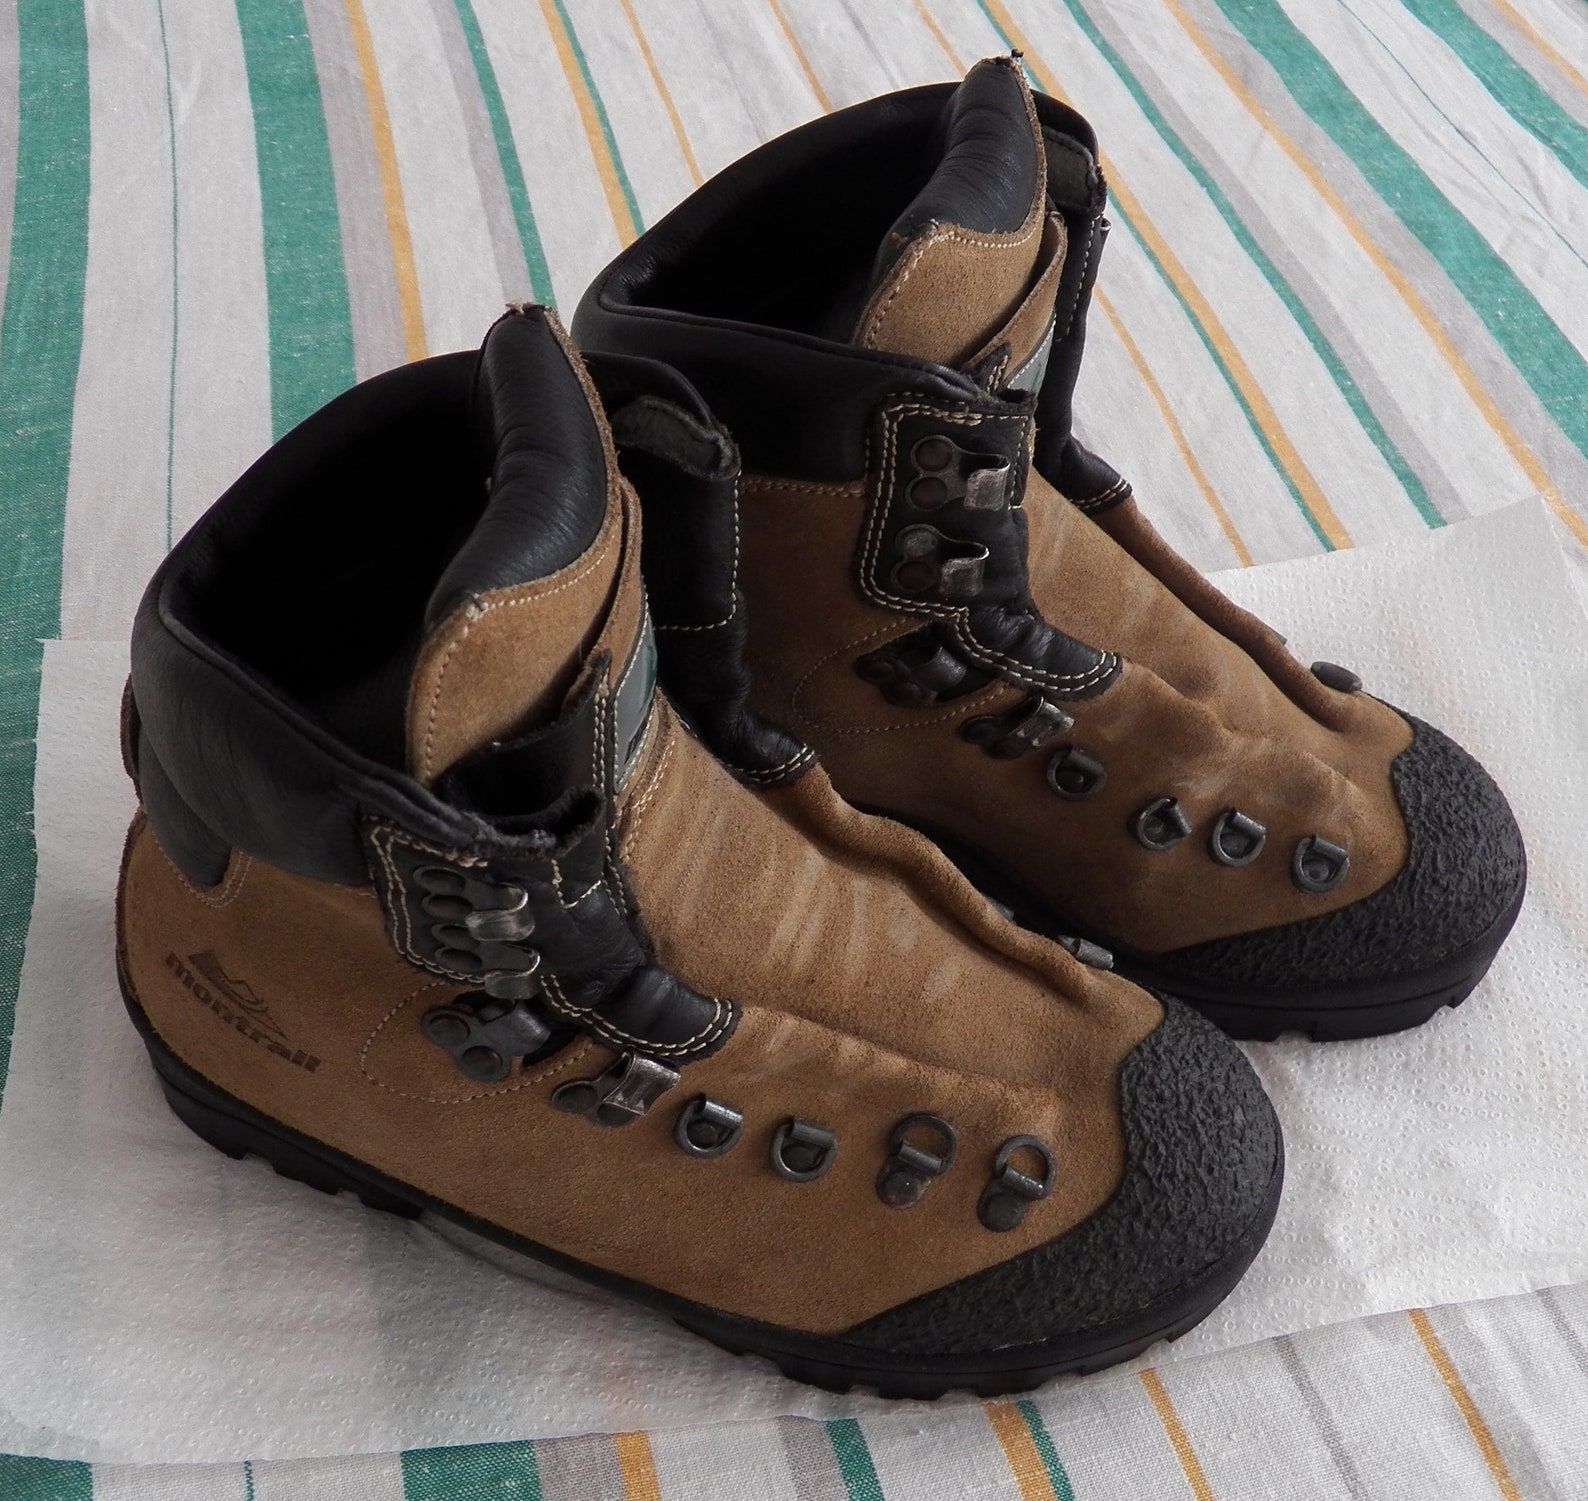 Womens Montrail Vercors Hiking Boots Tan Suede Leather US 6.5 EU 37 UK ...